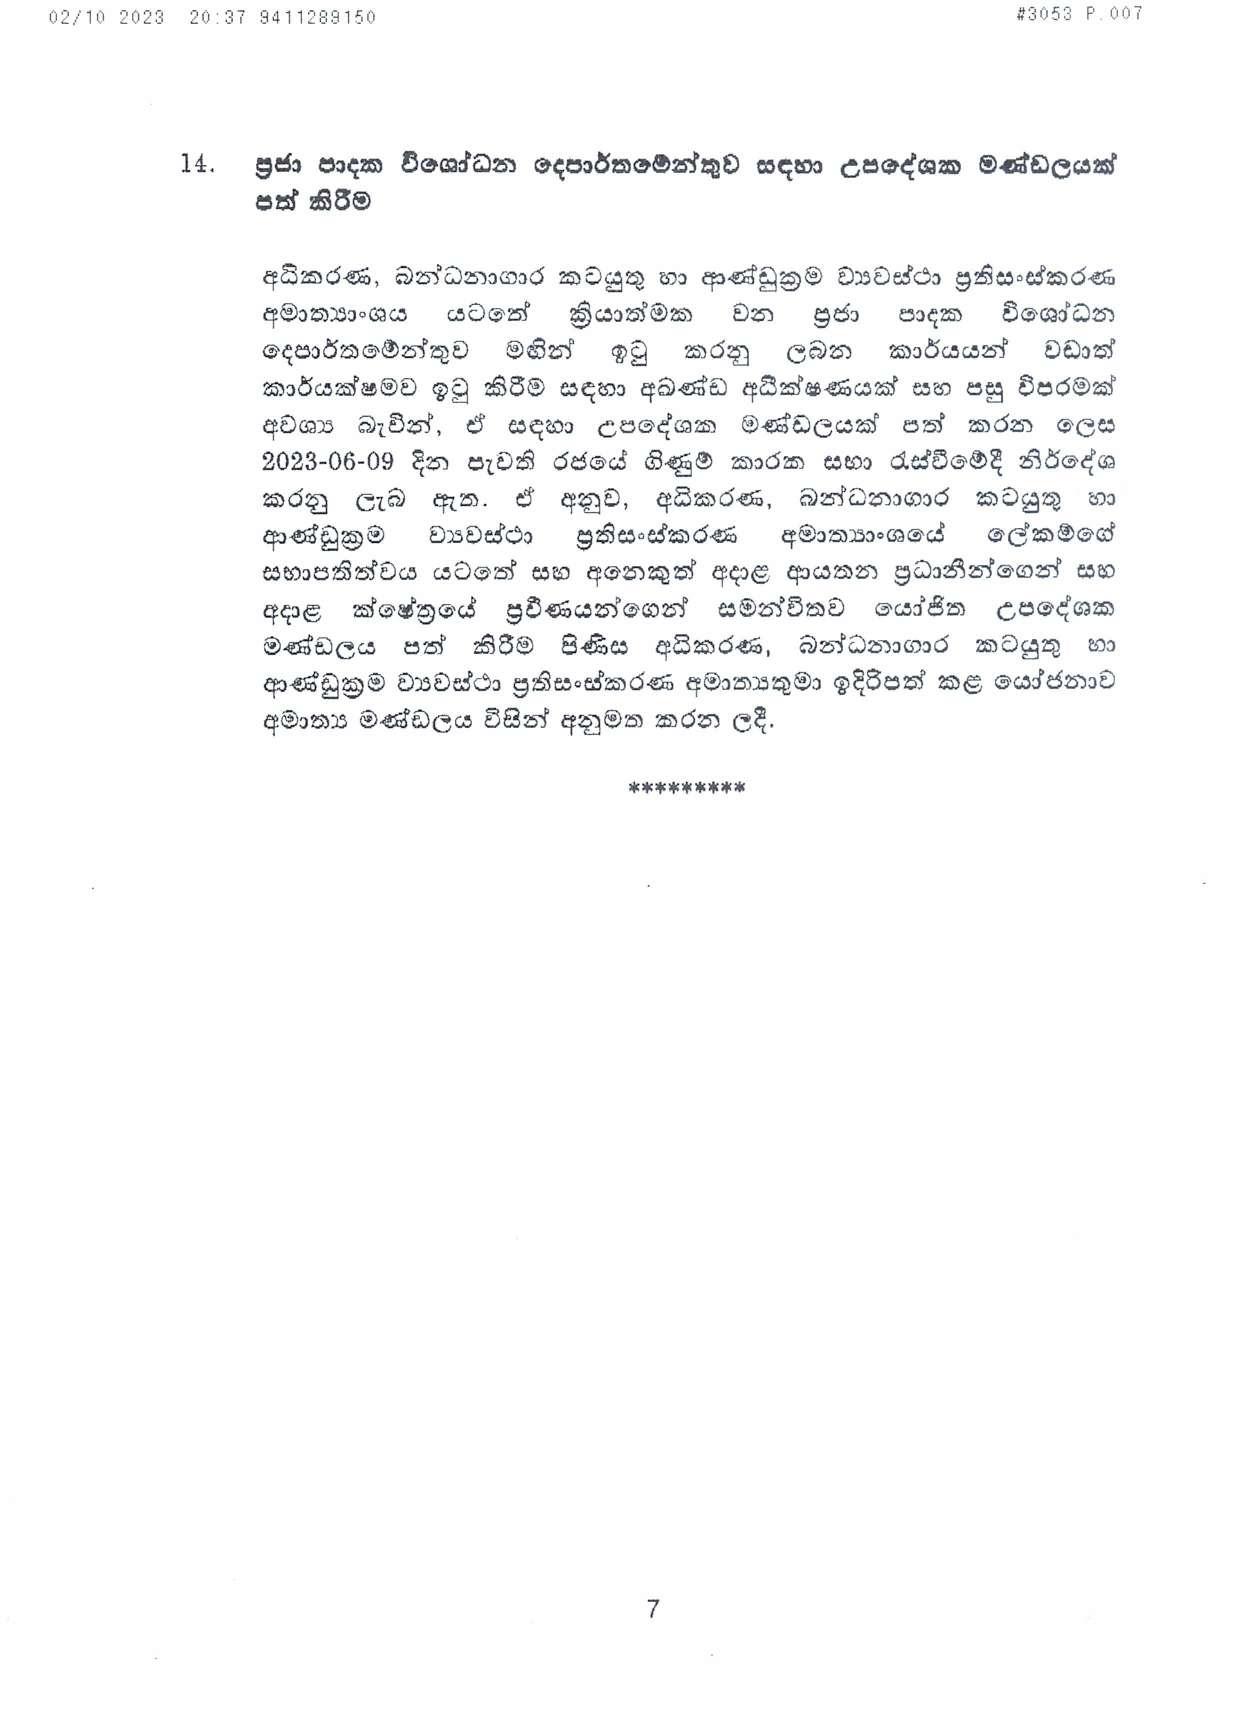 Cabinet Decision on 02.10.2023 1 page 007